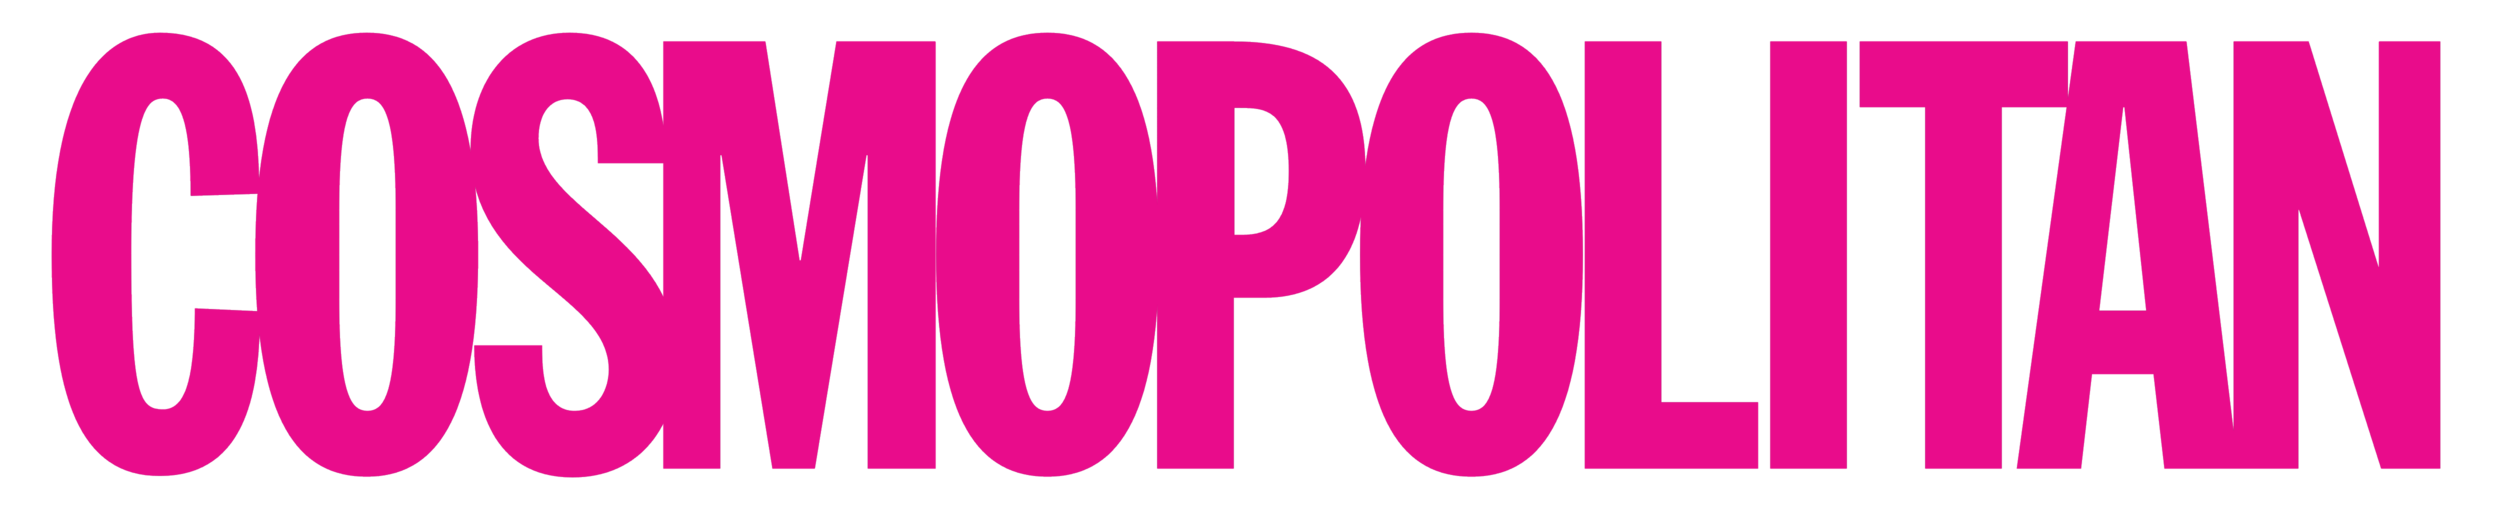 Cosmo_logo.png